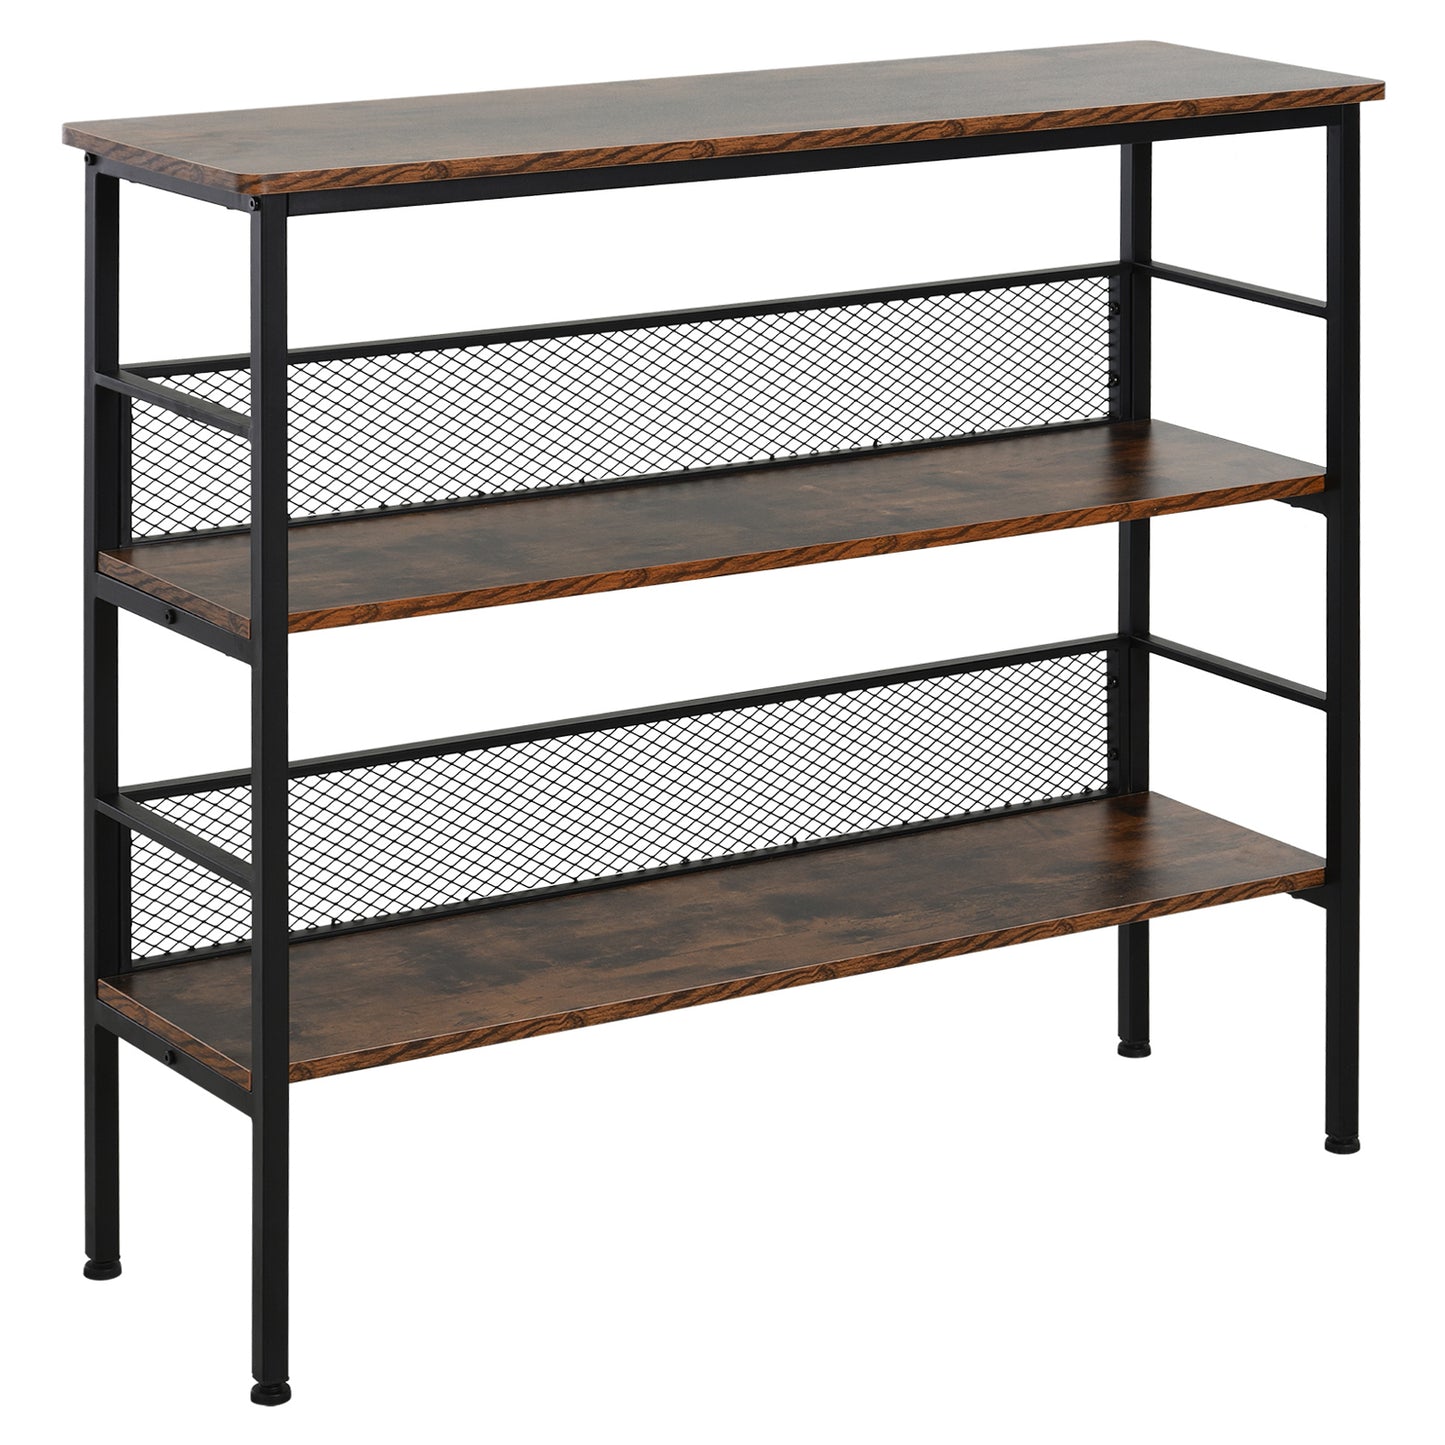 3-Tier Console Table Industrial Style Storage Metal Wooden Shelf with a Robust Multi-Functional Design & Adjustable Feet, Black